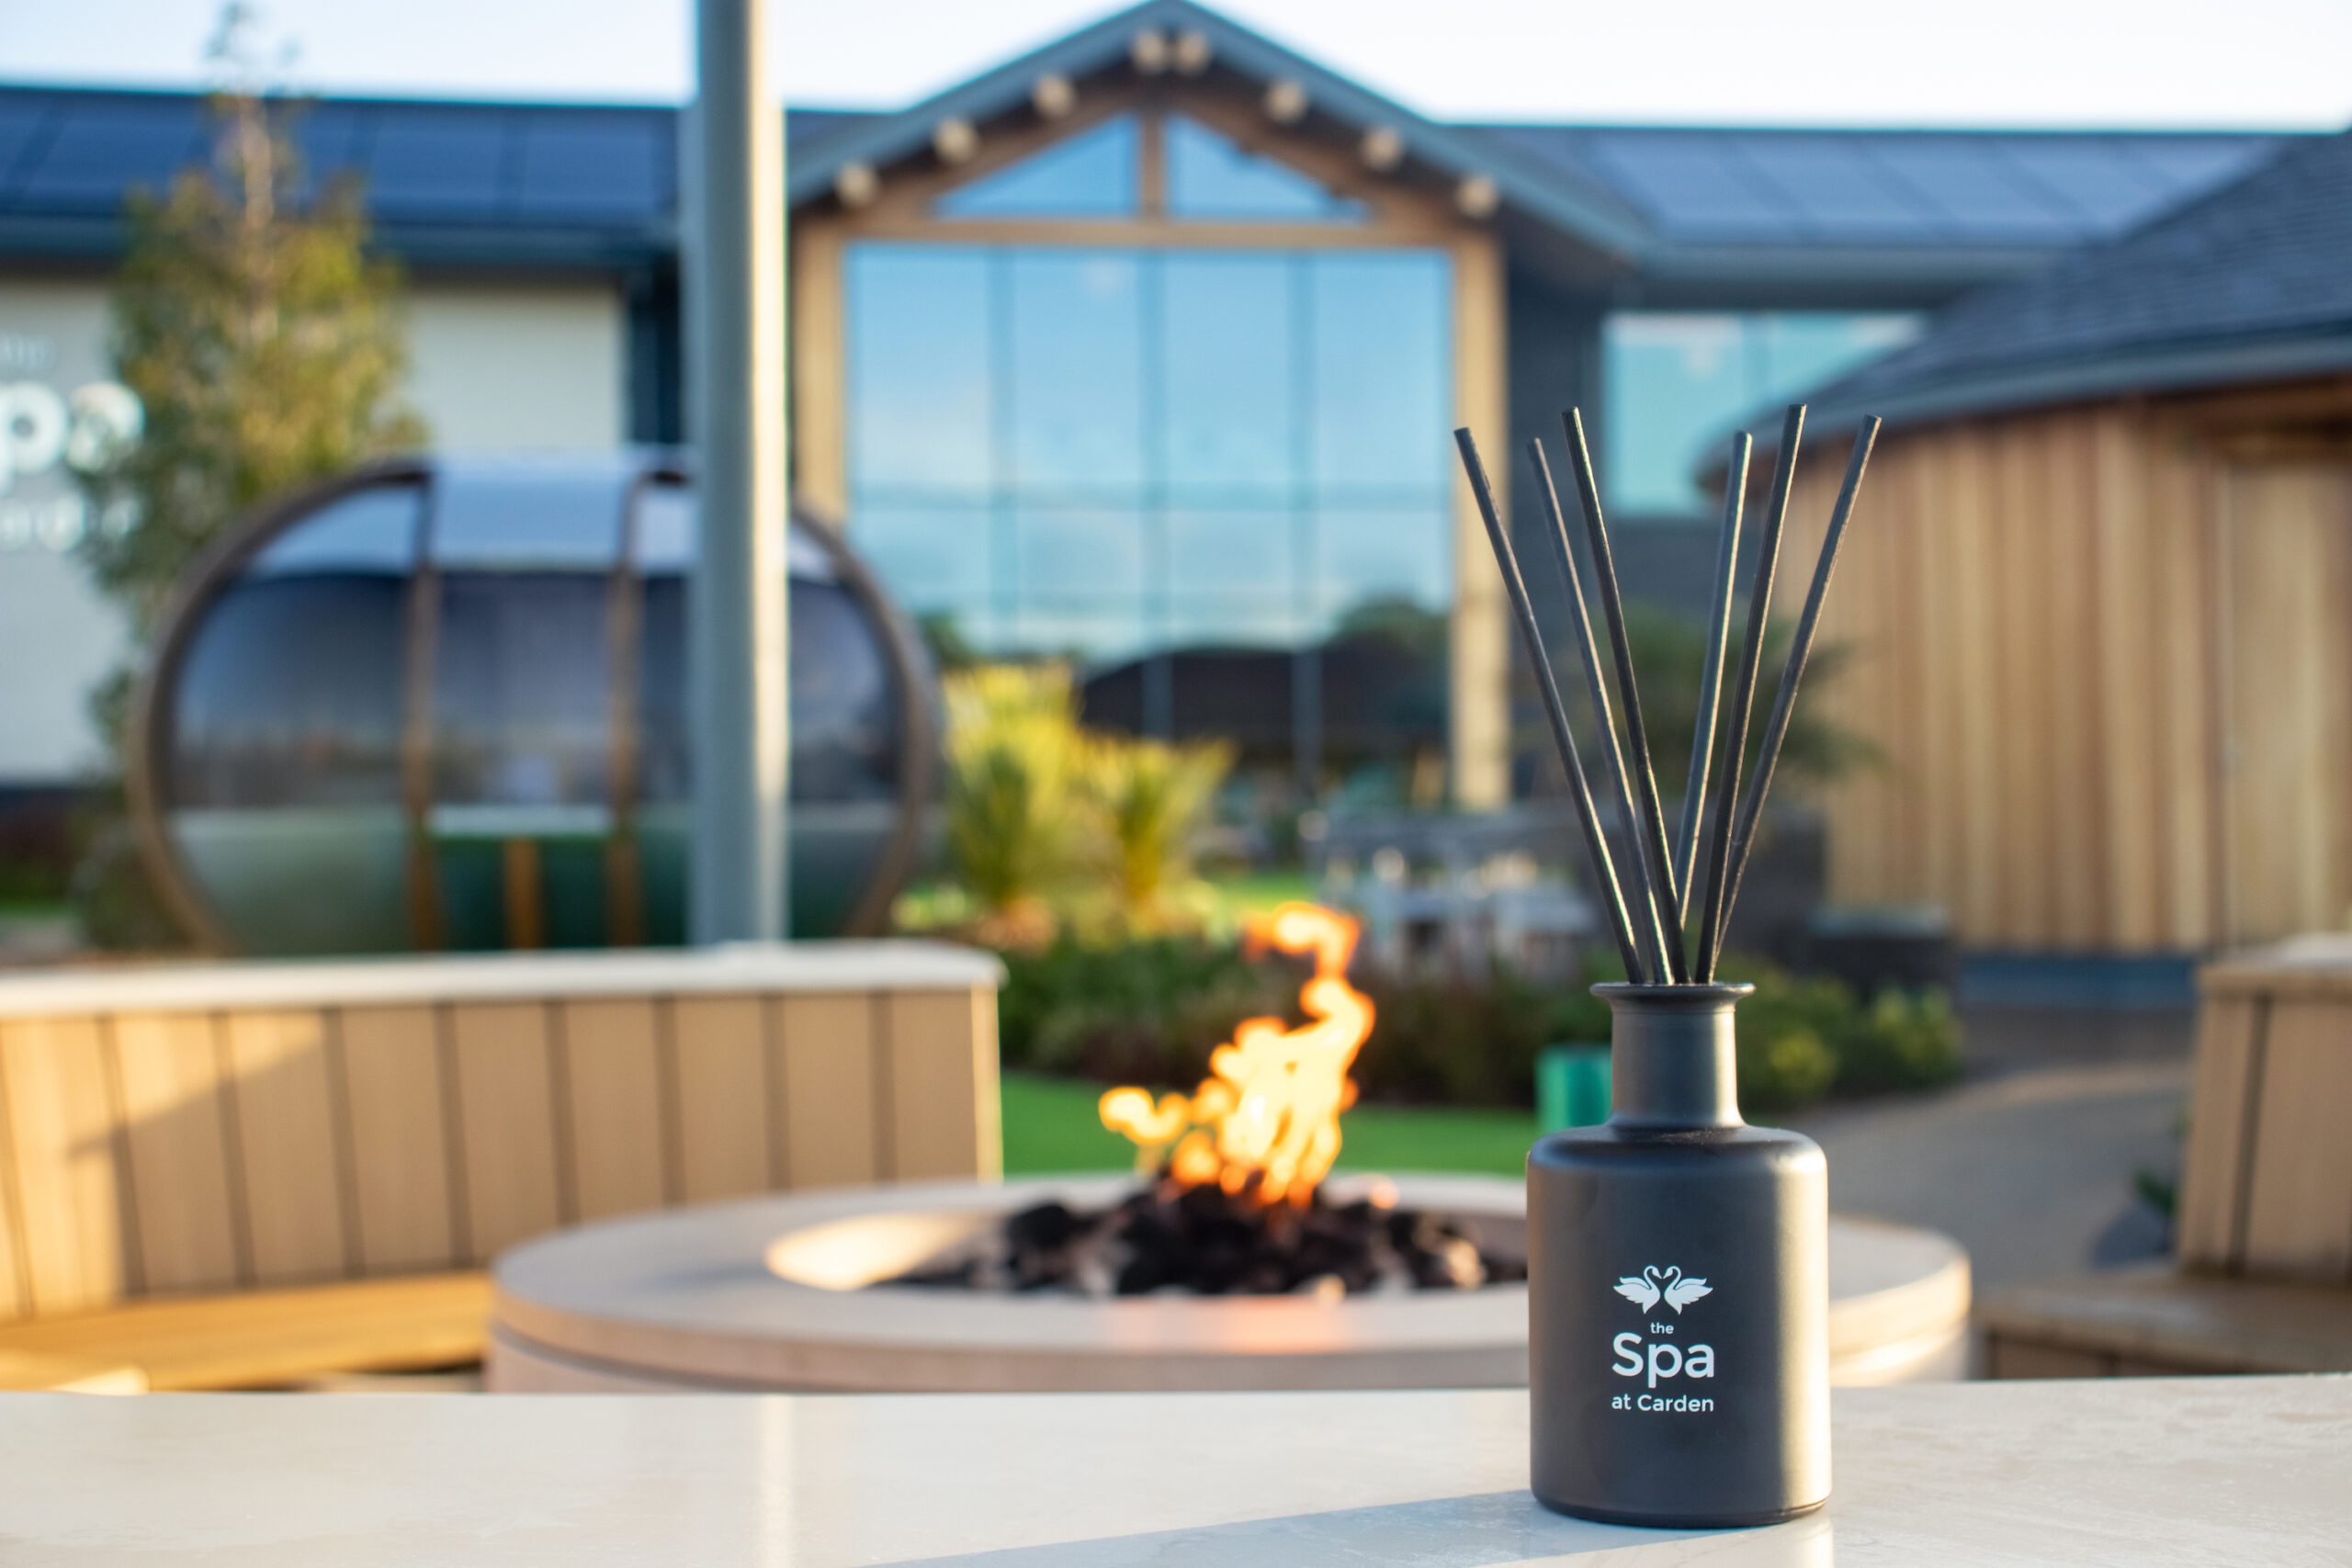 Oud diffuser in front of the Spa at Carden Park